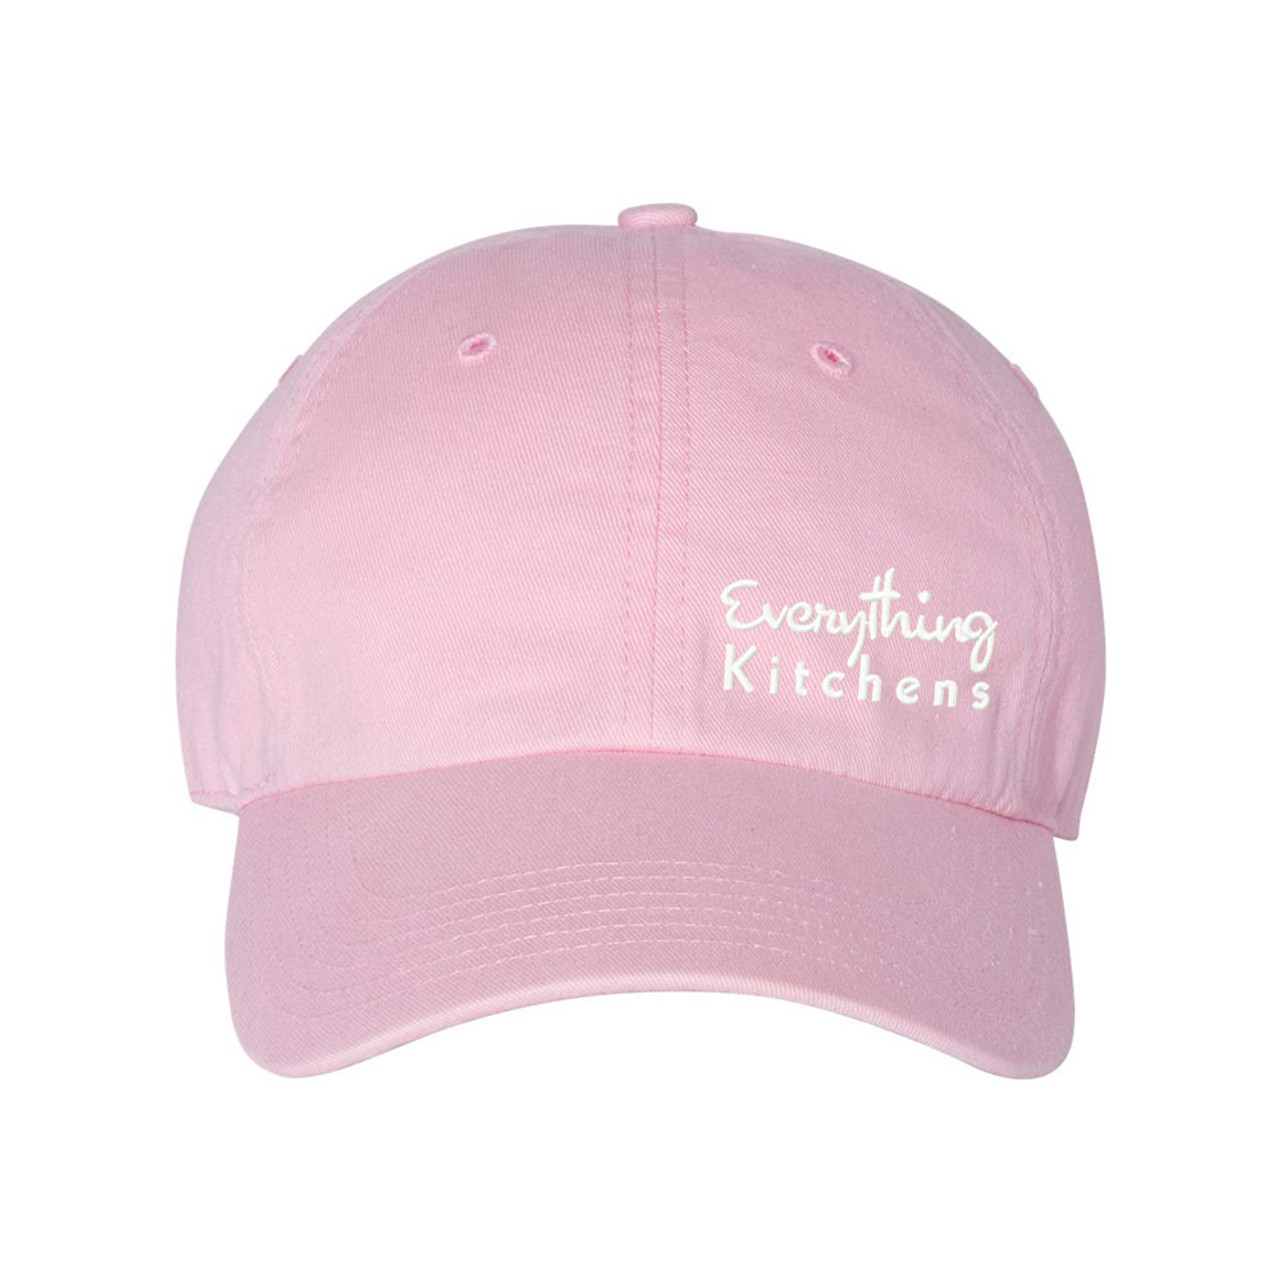 EVERYTHING KITCHENS - WHITE TEXT EMBROIDERY - Richardson Washed Chino Cap -  Pink